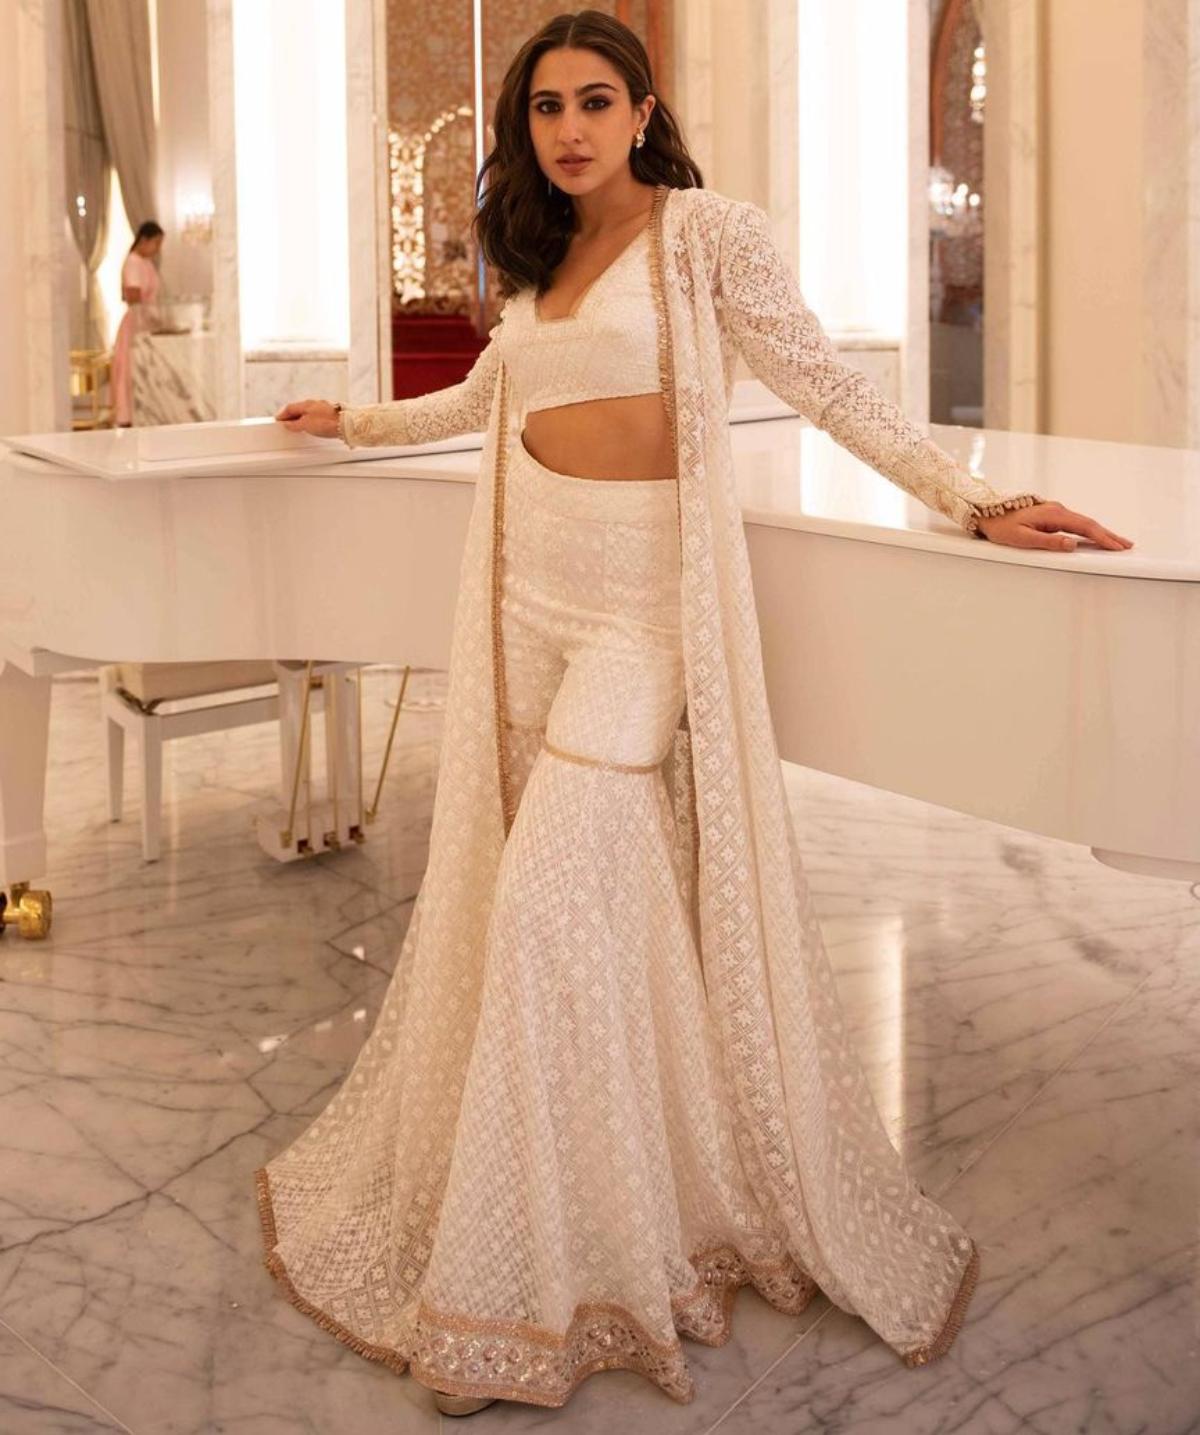 Sara Ali Khan looks like a vision in white as she pulls off a chic and contemporary white chikankari sharara set. The 'Kedarnath' star looks like an absolute angel as she carries off the alluring ethnic attire with all her grace. While the long chikankari jacket adds power to her otherwise ethnic ensemble, the golden borders on her beautiful long jacket and at the hemline of her splendid sharara, gave her intricately embroidered sharara set a tinge of glamour. The young star accessorised her spotless look with nothing but a pair of chunky diamond studs. She beamed with her inner glow as she chose a subtle make-up for her angelic ethnic look. 